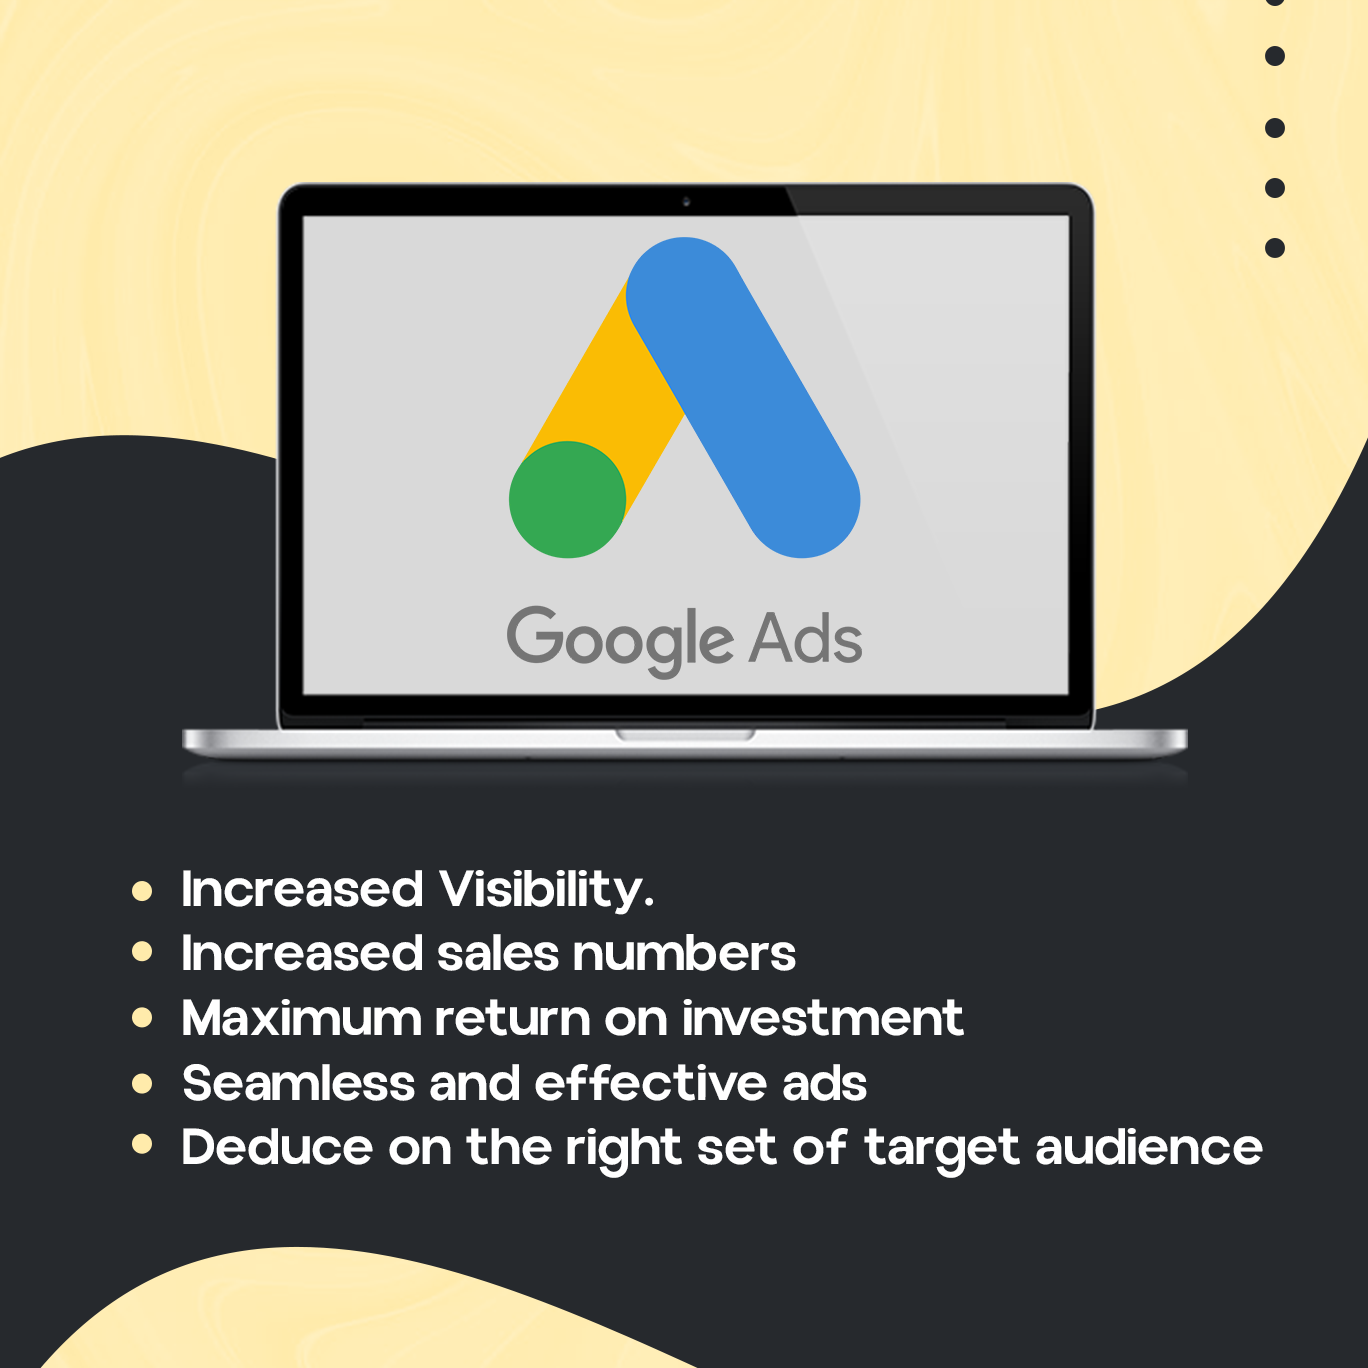 Uses of Google ads